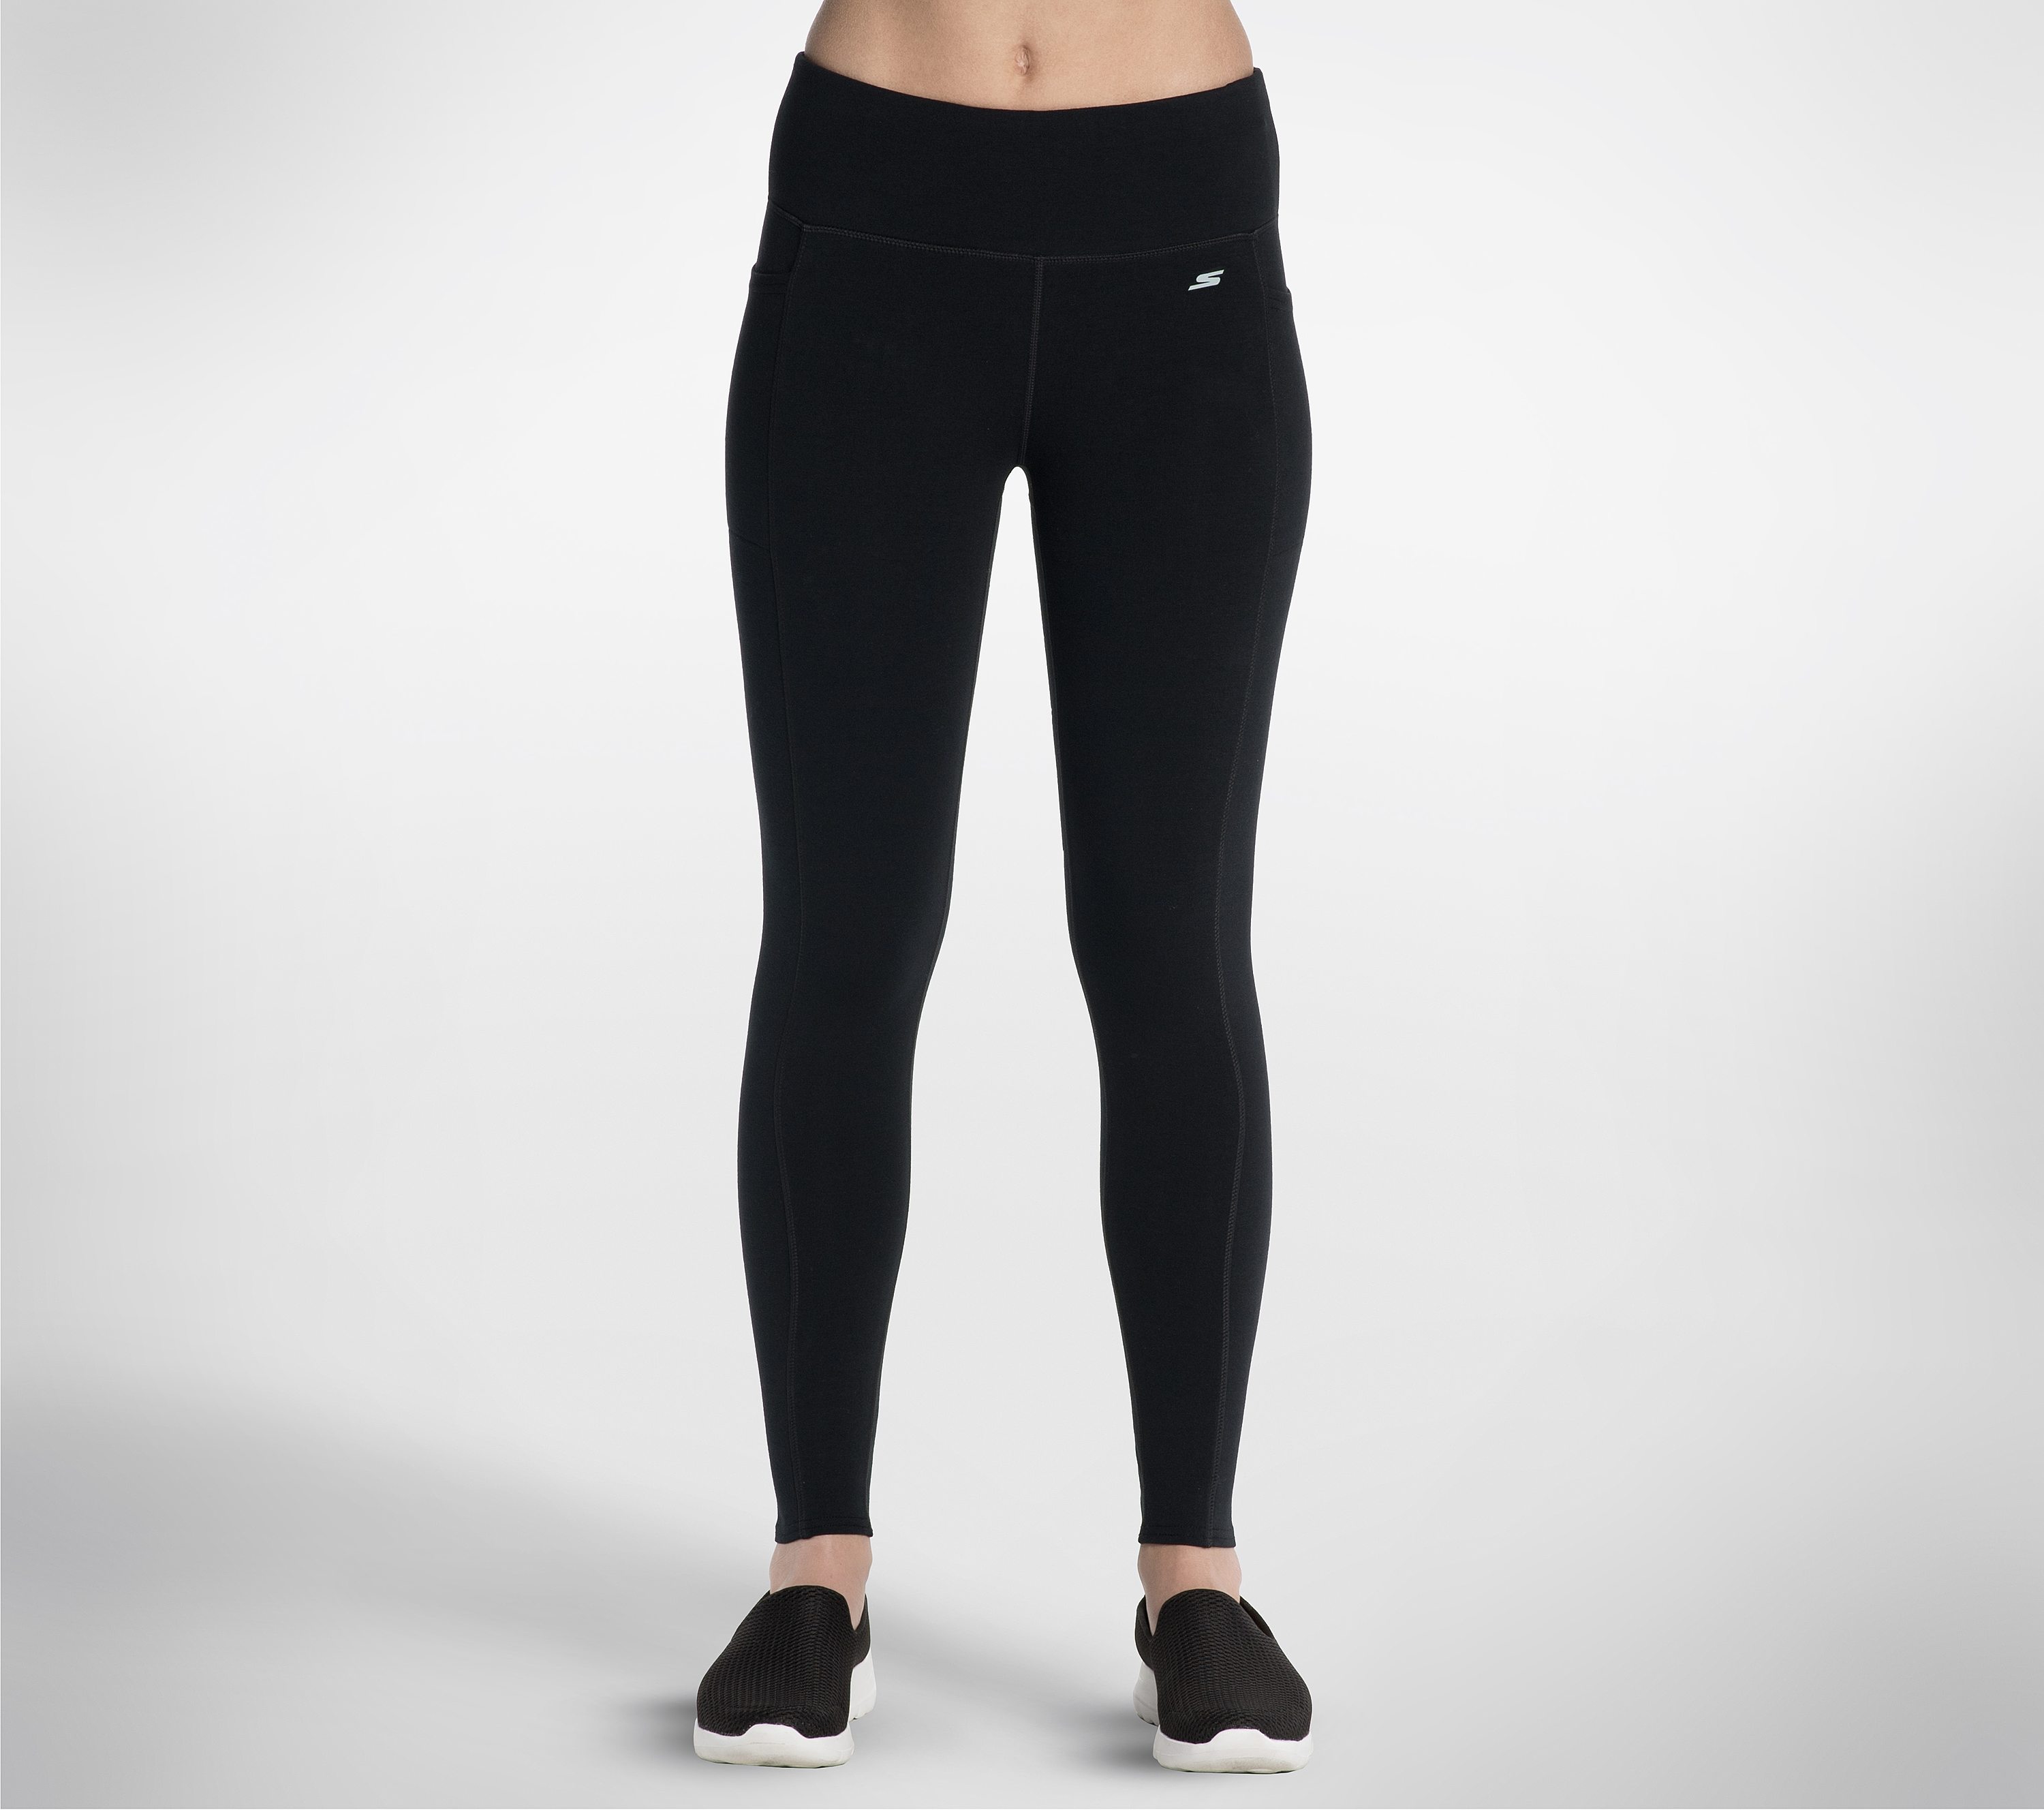 skechers leggings with pockets costco